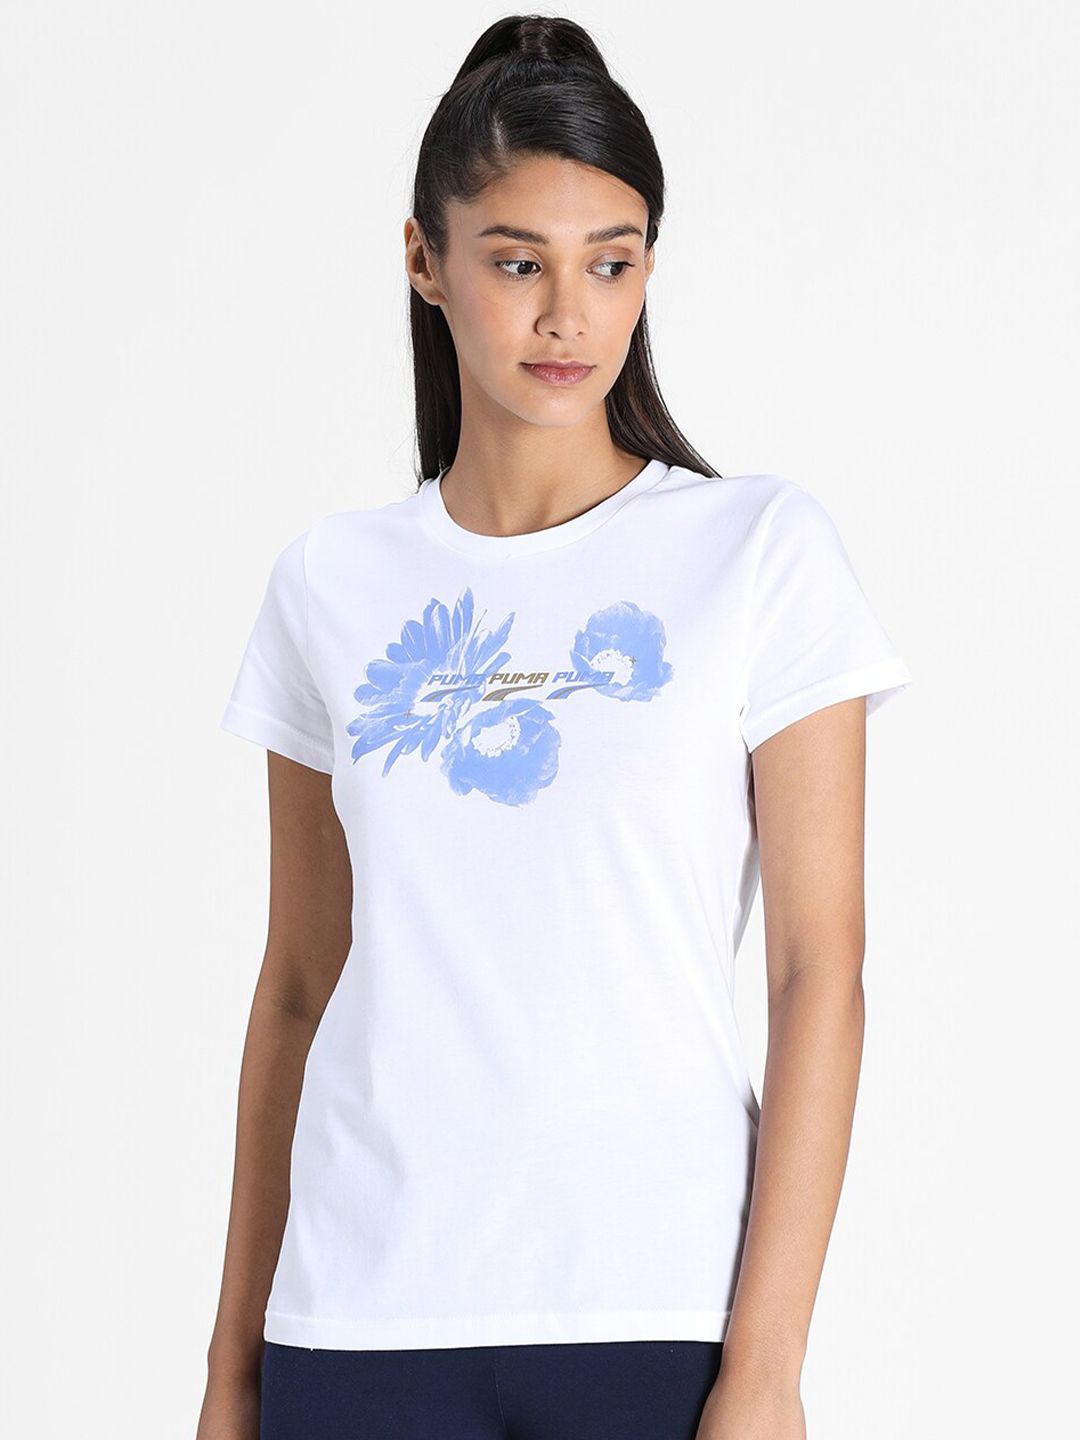 Puma Women White & Blue Evide Graphic Printed Pure Cotton T-shirt Price in India